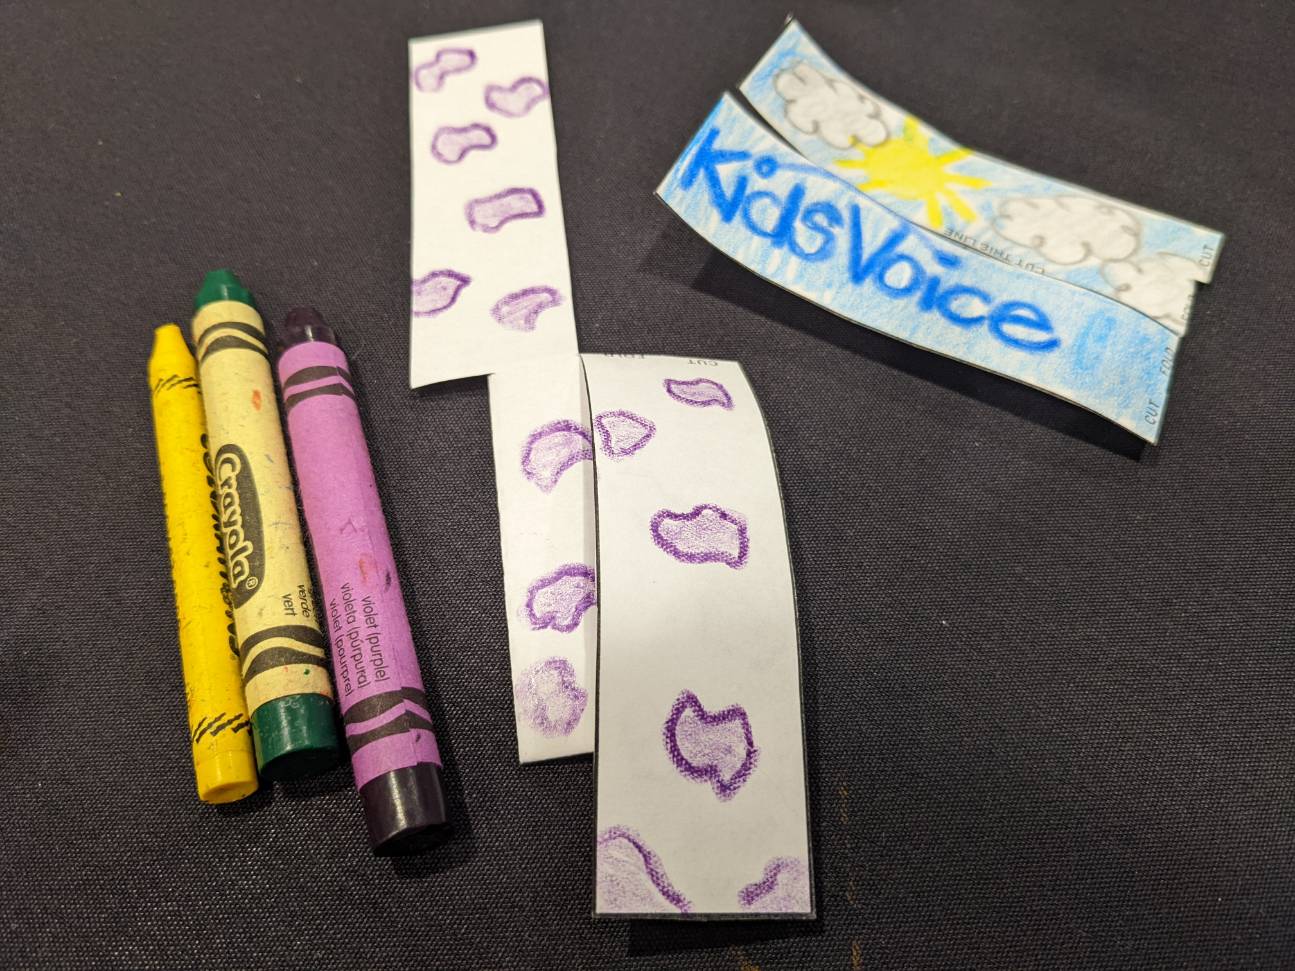 Three crayons lay next to two strips of paper, one decorated with purple spots and the other with clouds, the sun, and the word KidsVoice 